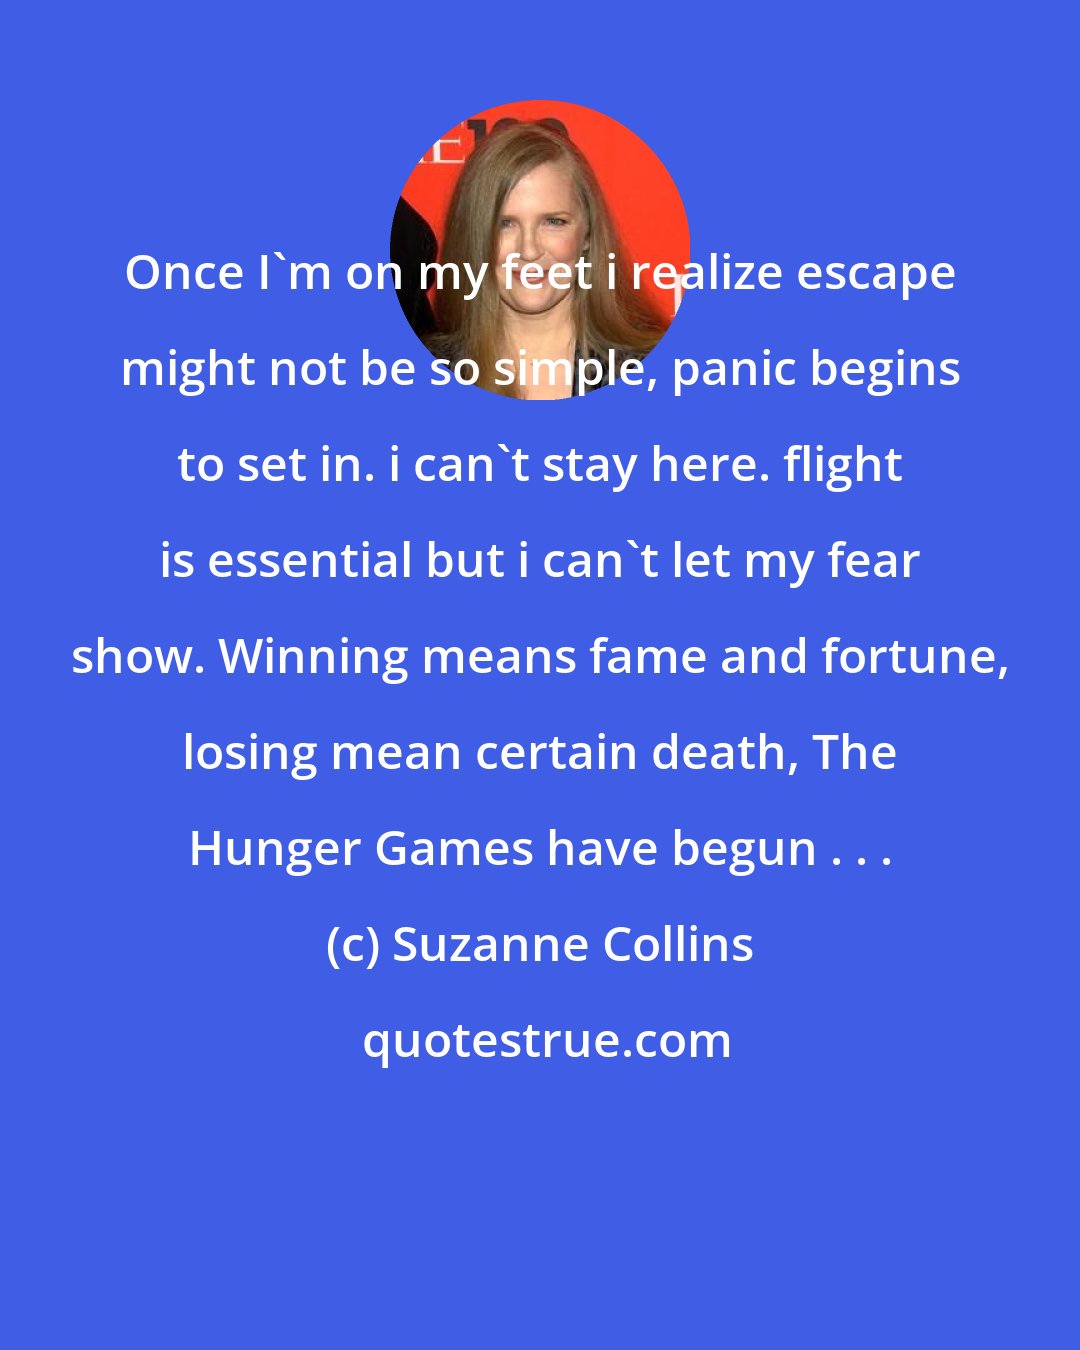 Suzanne Collins: Once I'm on my feet i realize escape might not be so simple, panic begins to set in. i can't stay here. flight is essential but i can't let my fear show. Winning means fame and fortune, losing mean certain death, The Hunger Games have begun . . .